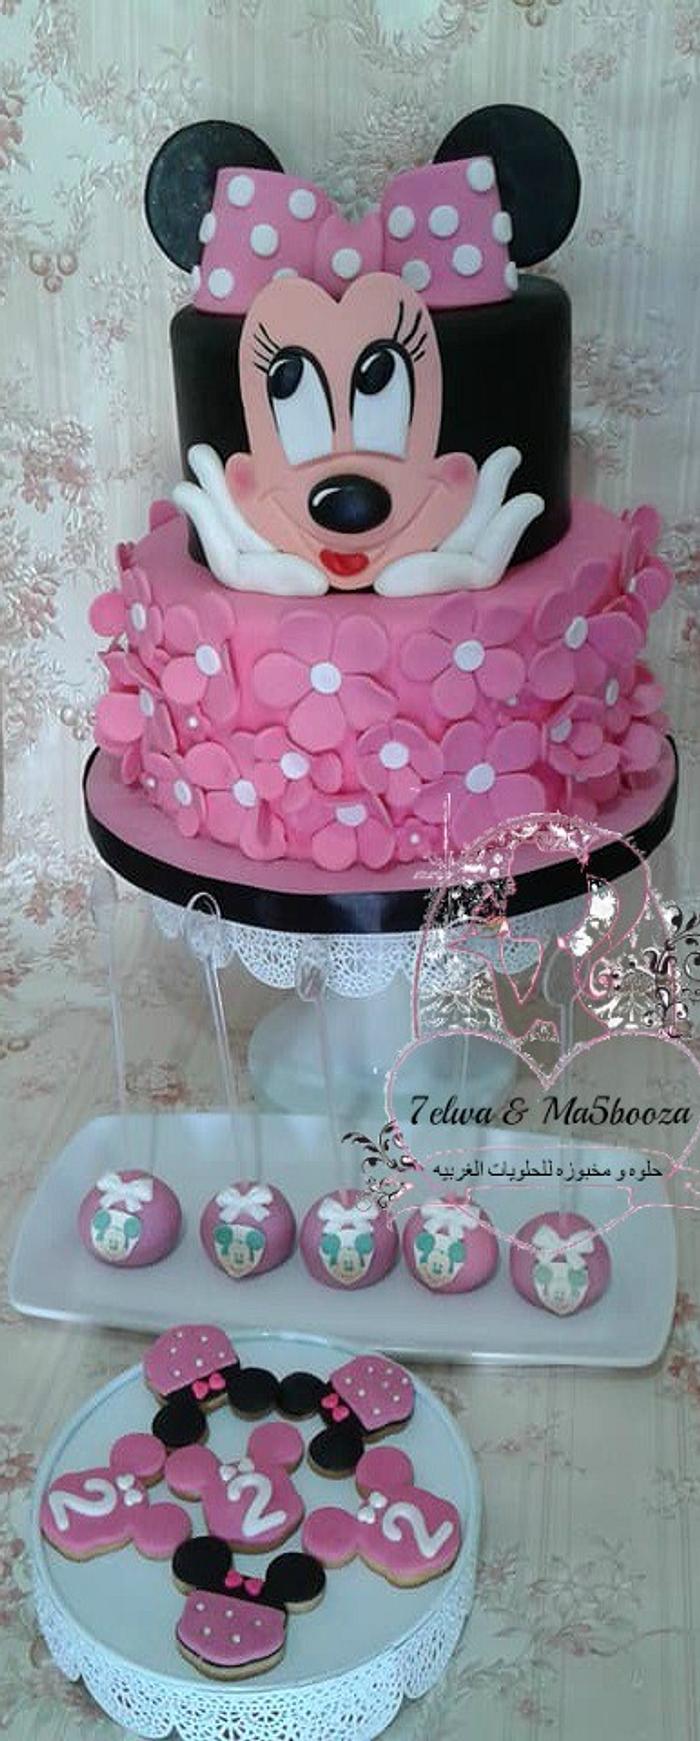 2 tier Minnie mouse cake 